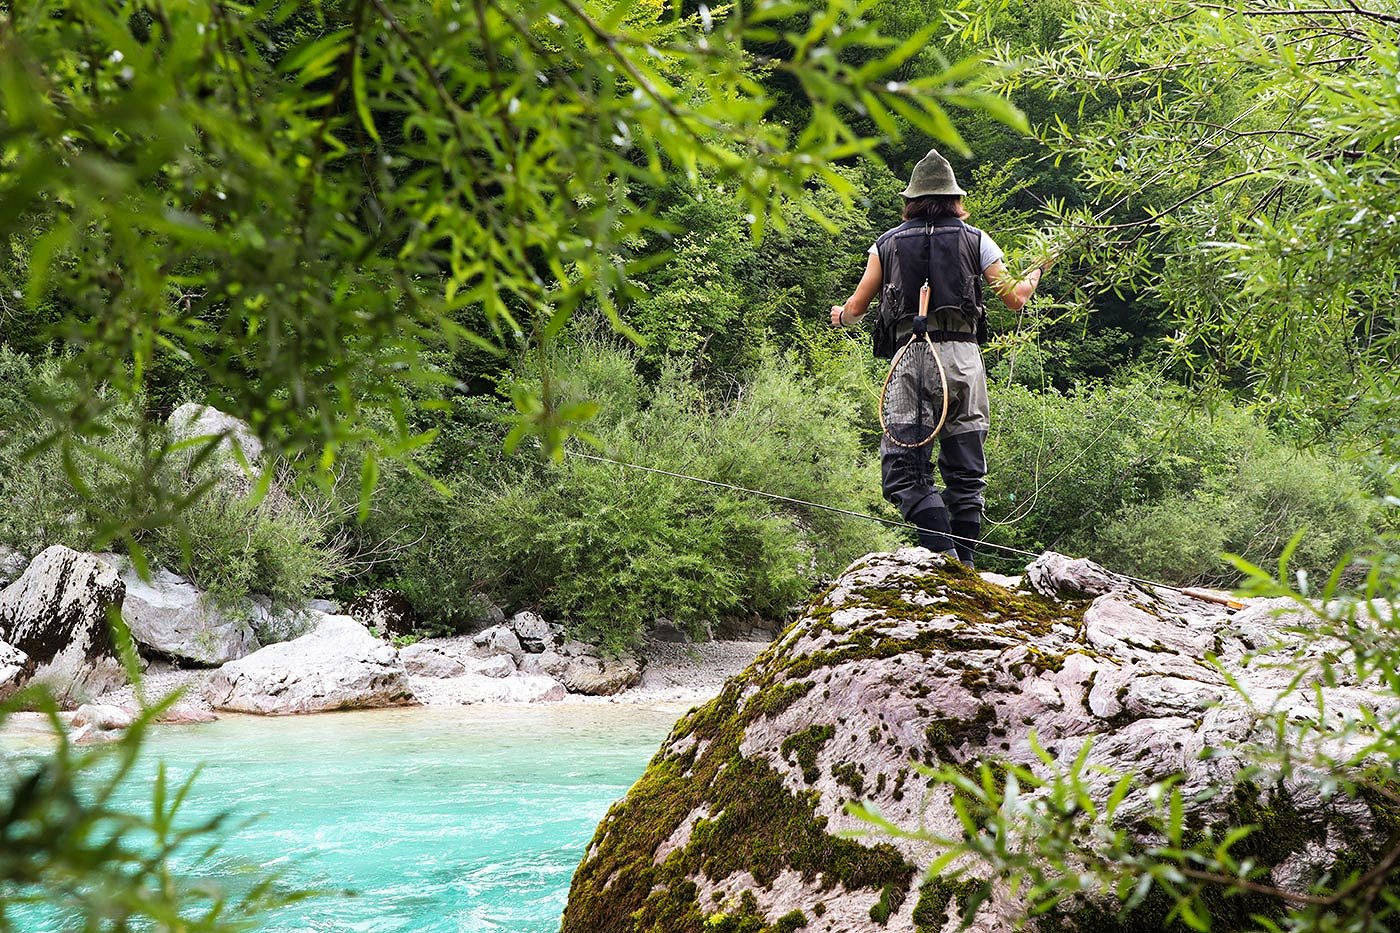 A fly fisherman on a rock by the emerald river Soča